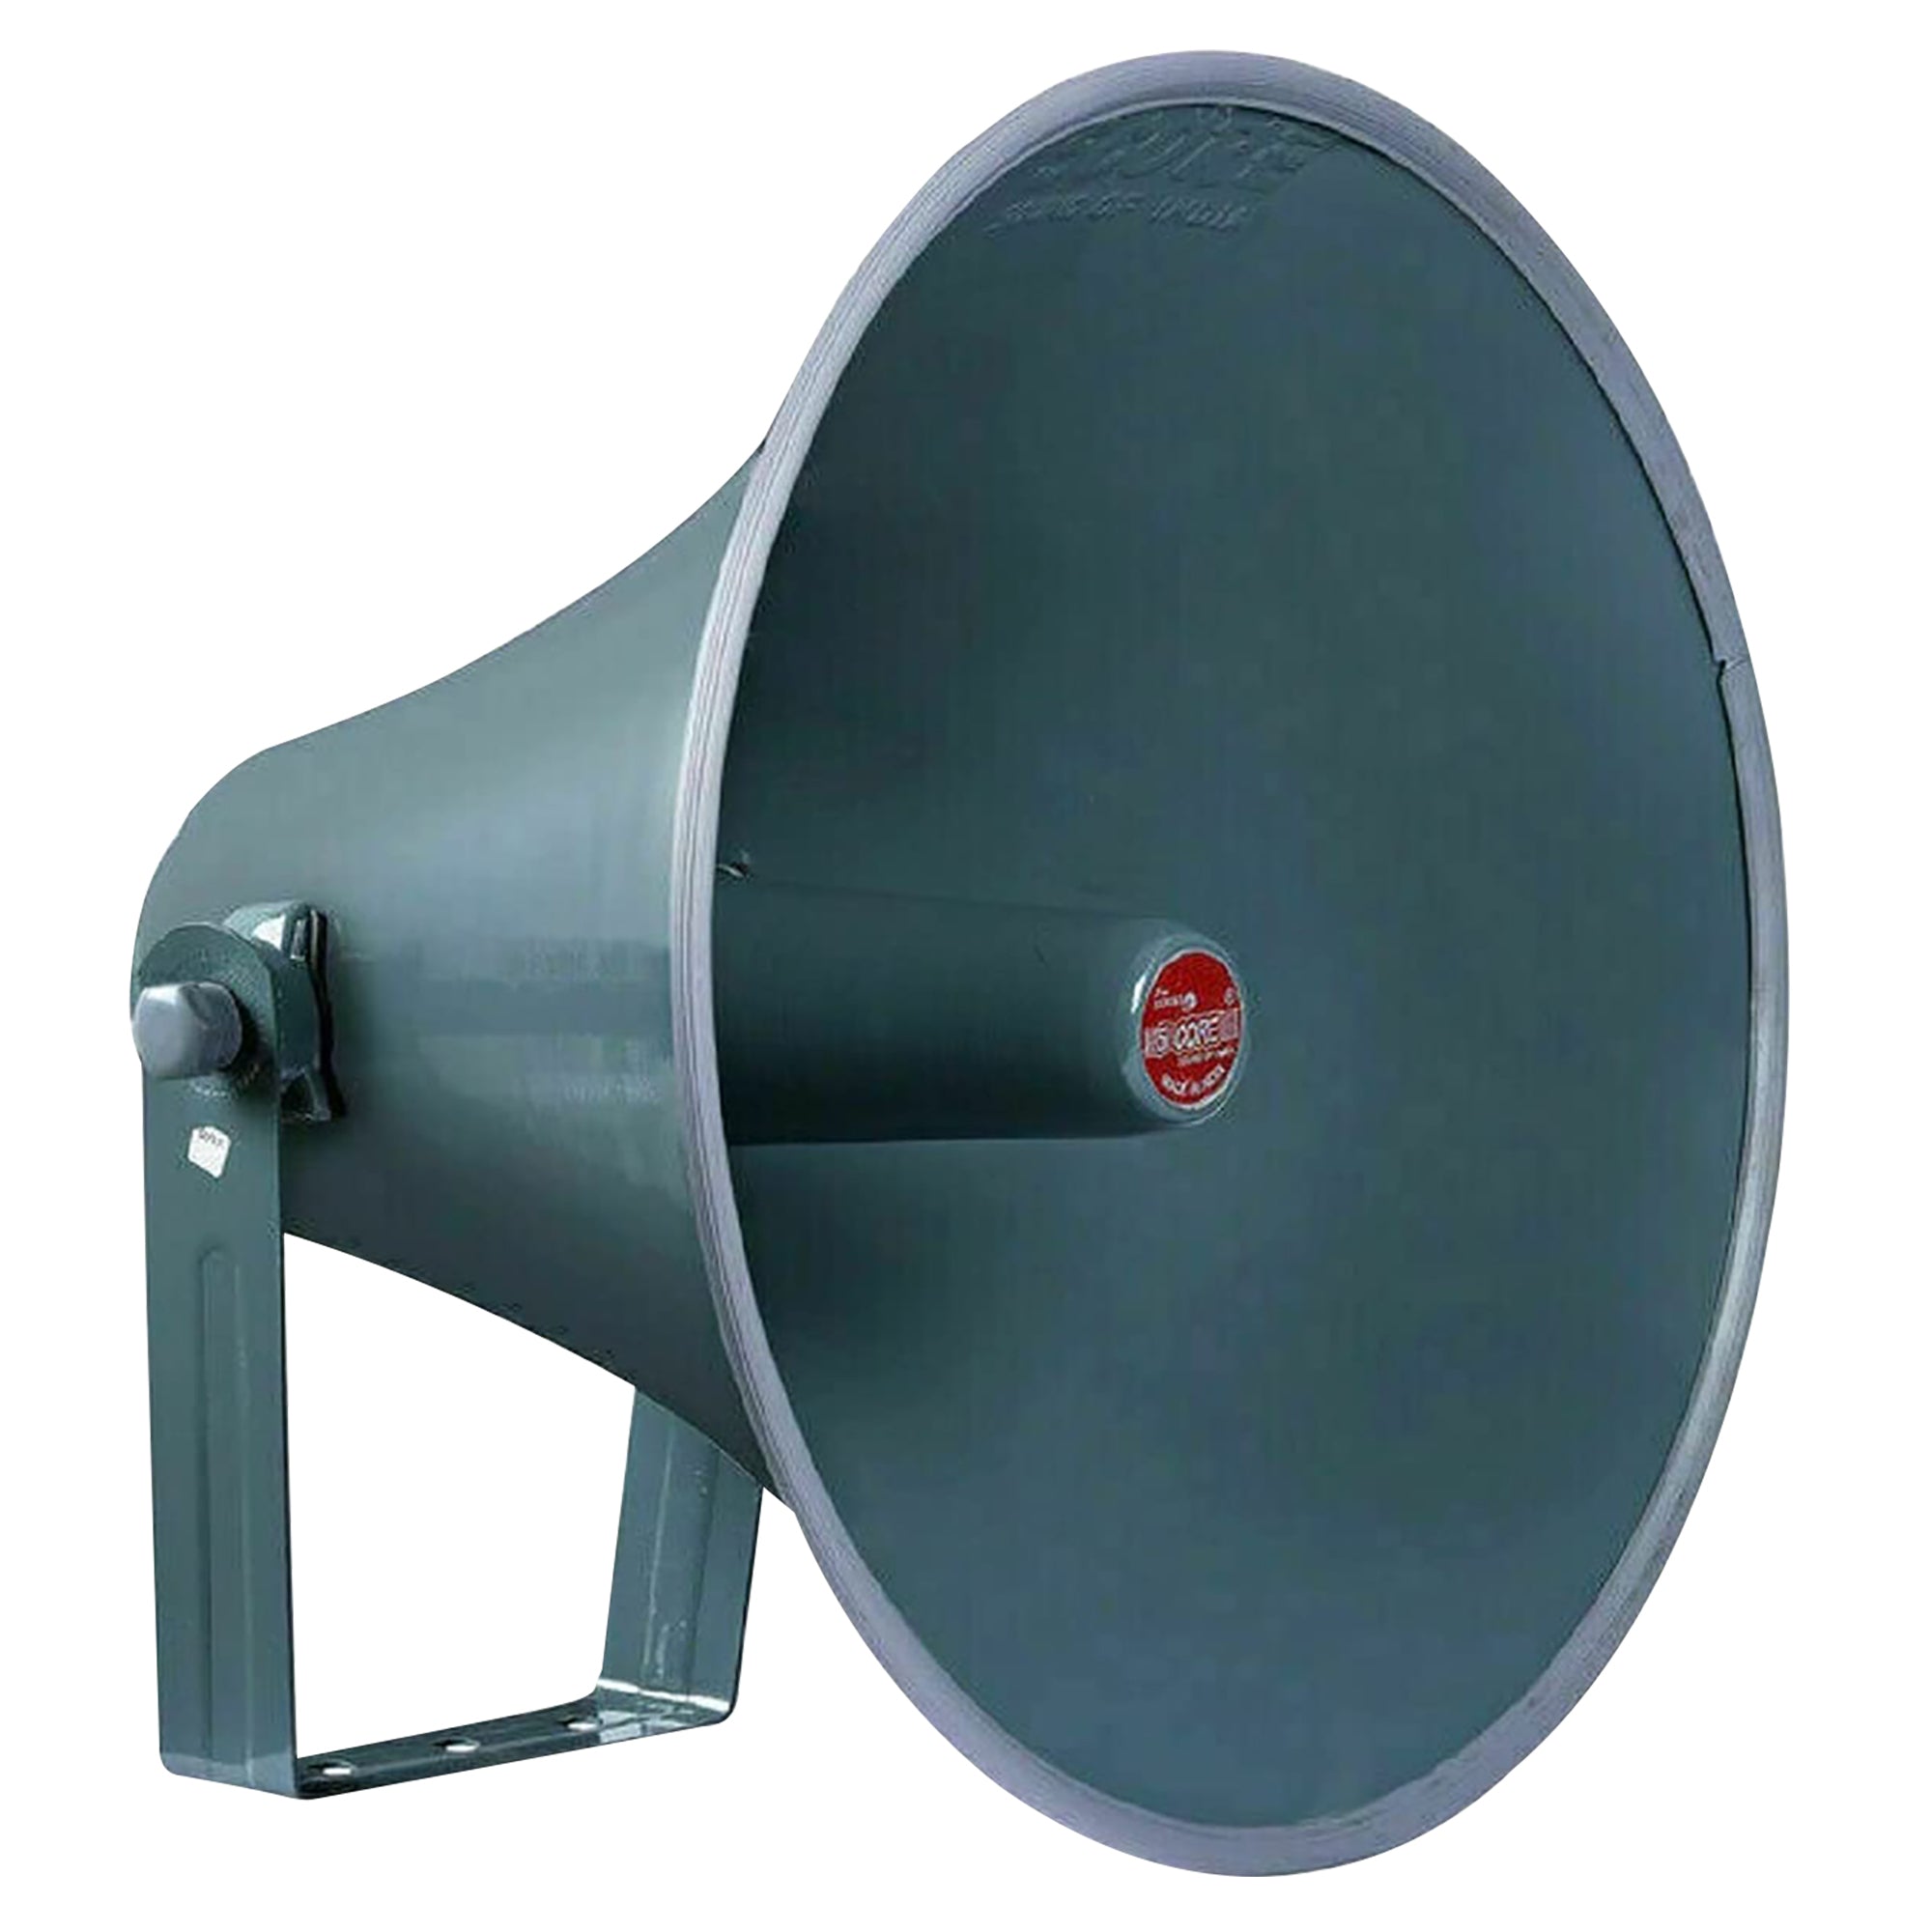 5 Core PA Speaker Horn Throat 16 inch All Weather Use Support Wide Range of Compression Drivers